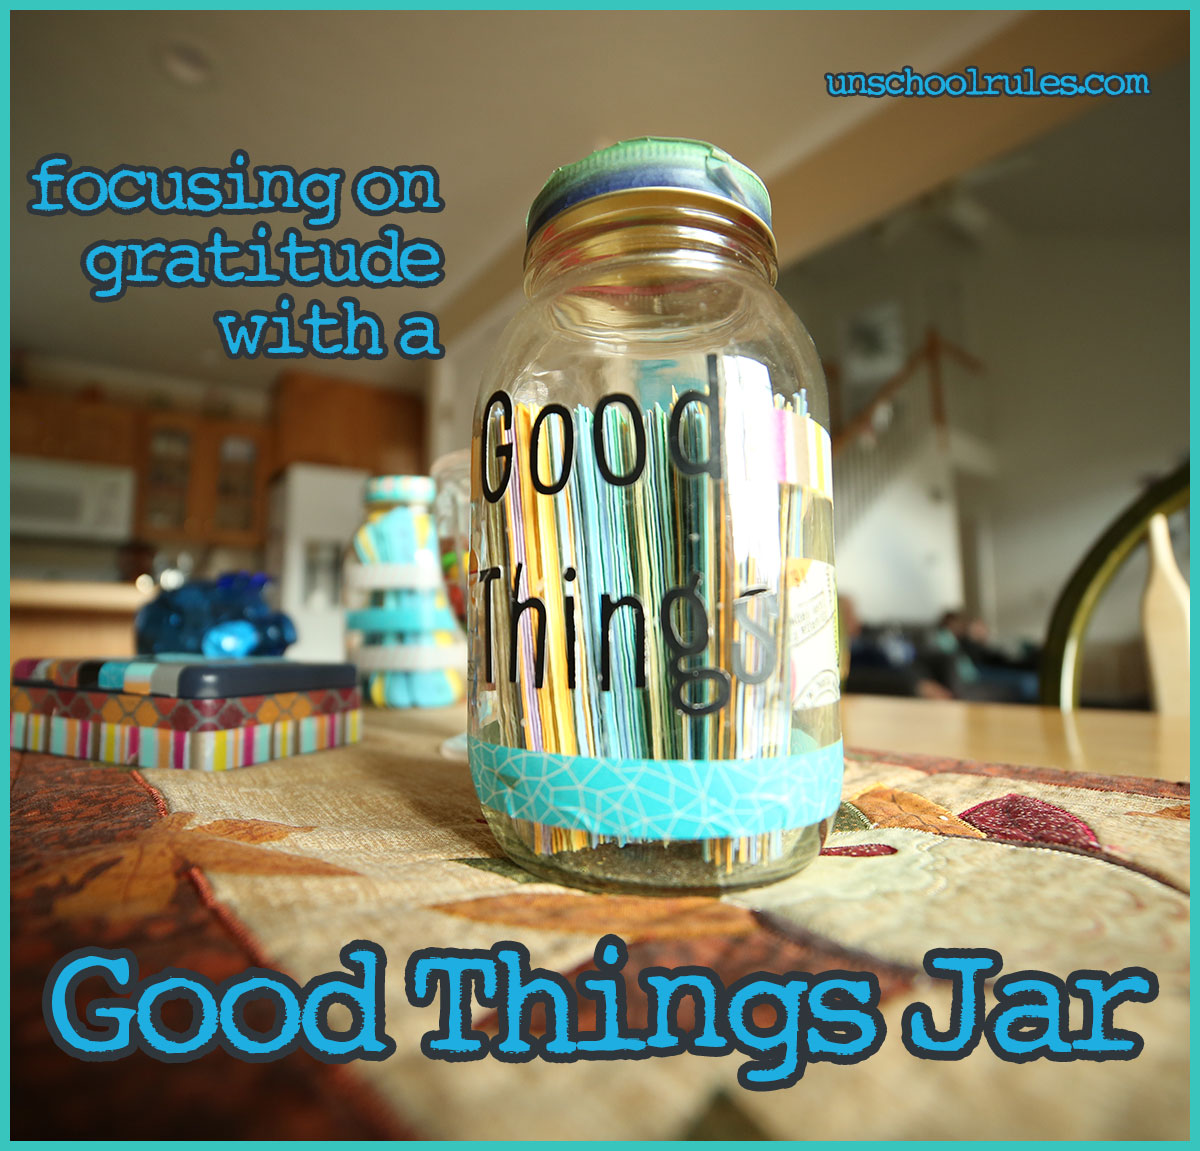 Our Good Things Jar invites family members to celebrate big and small moments (Unschool Rules).